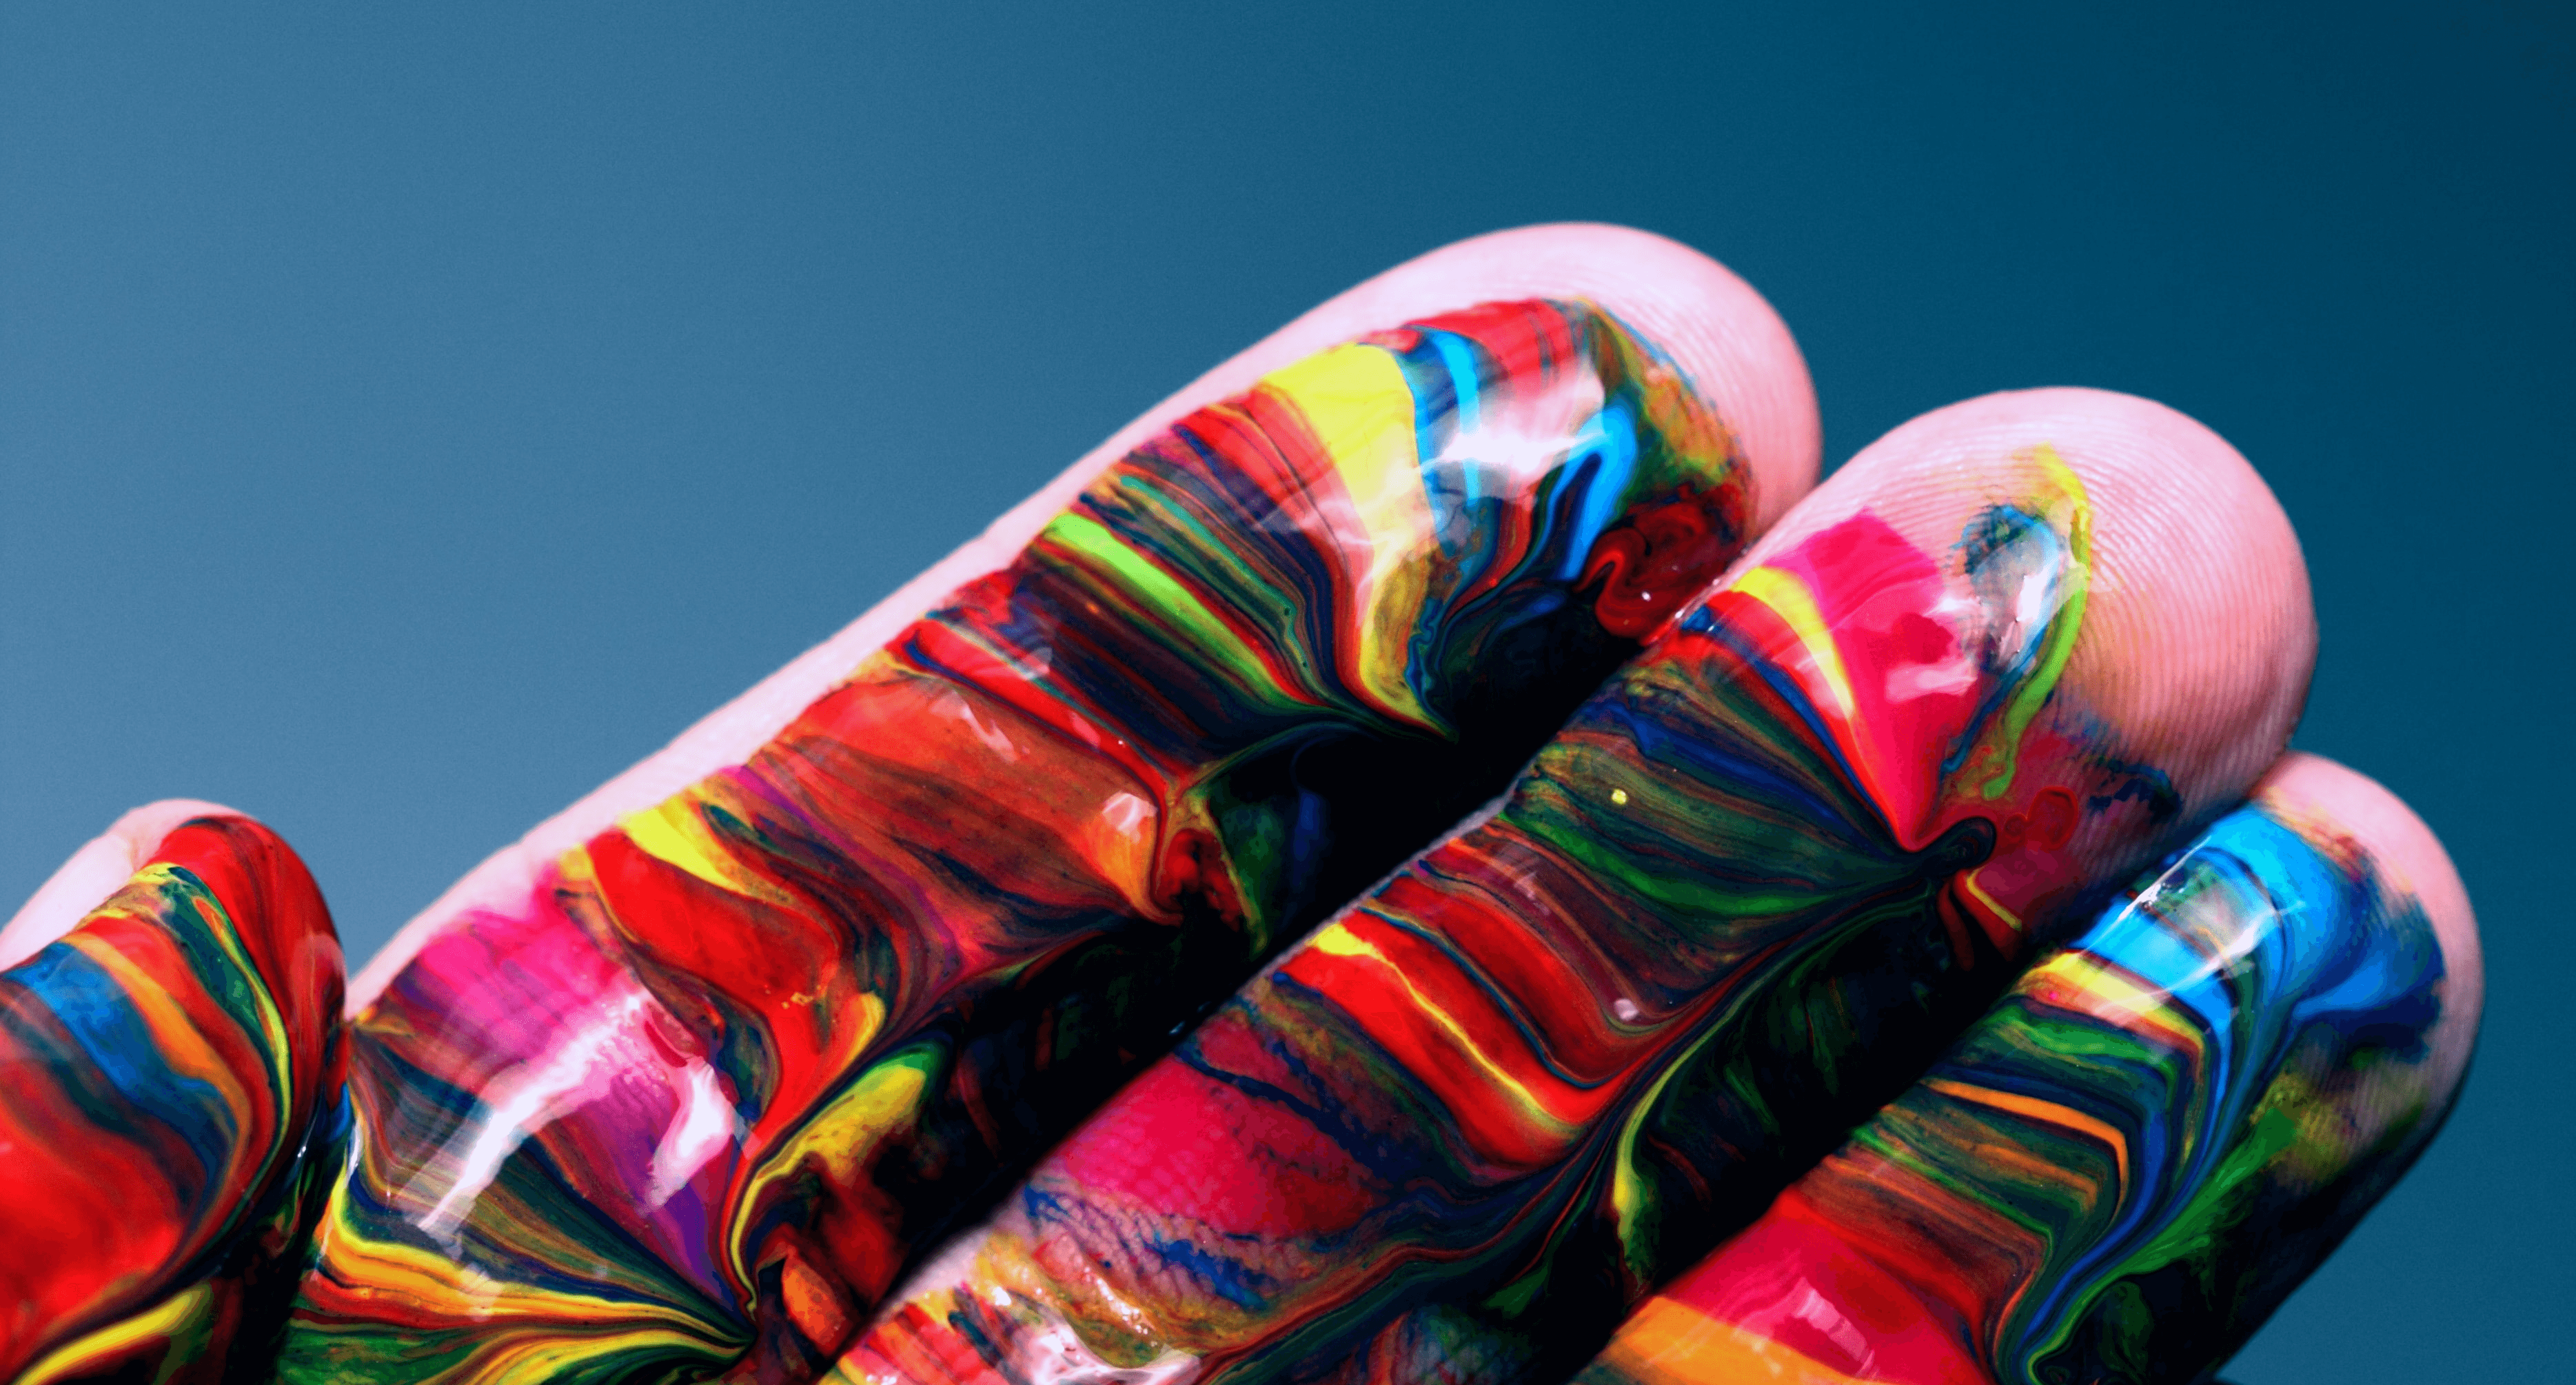 A hand with rainbow paint on it